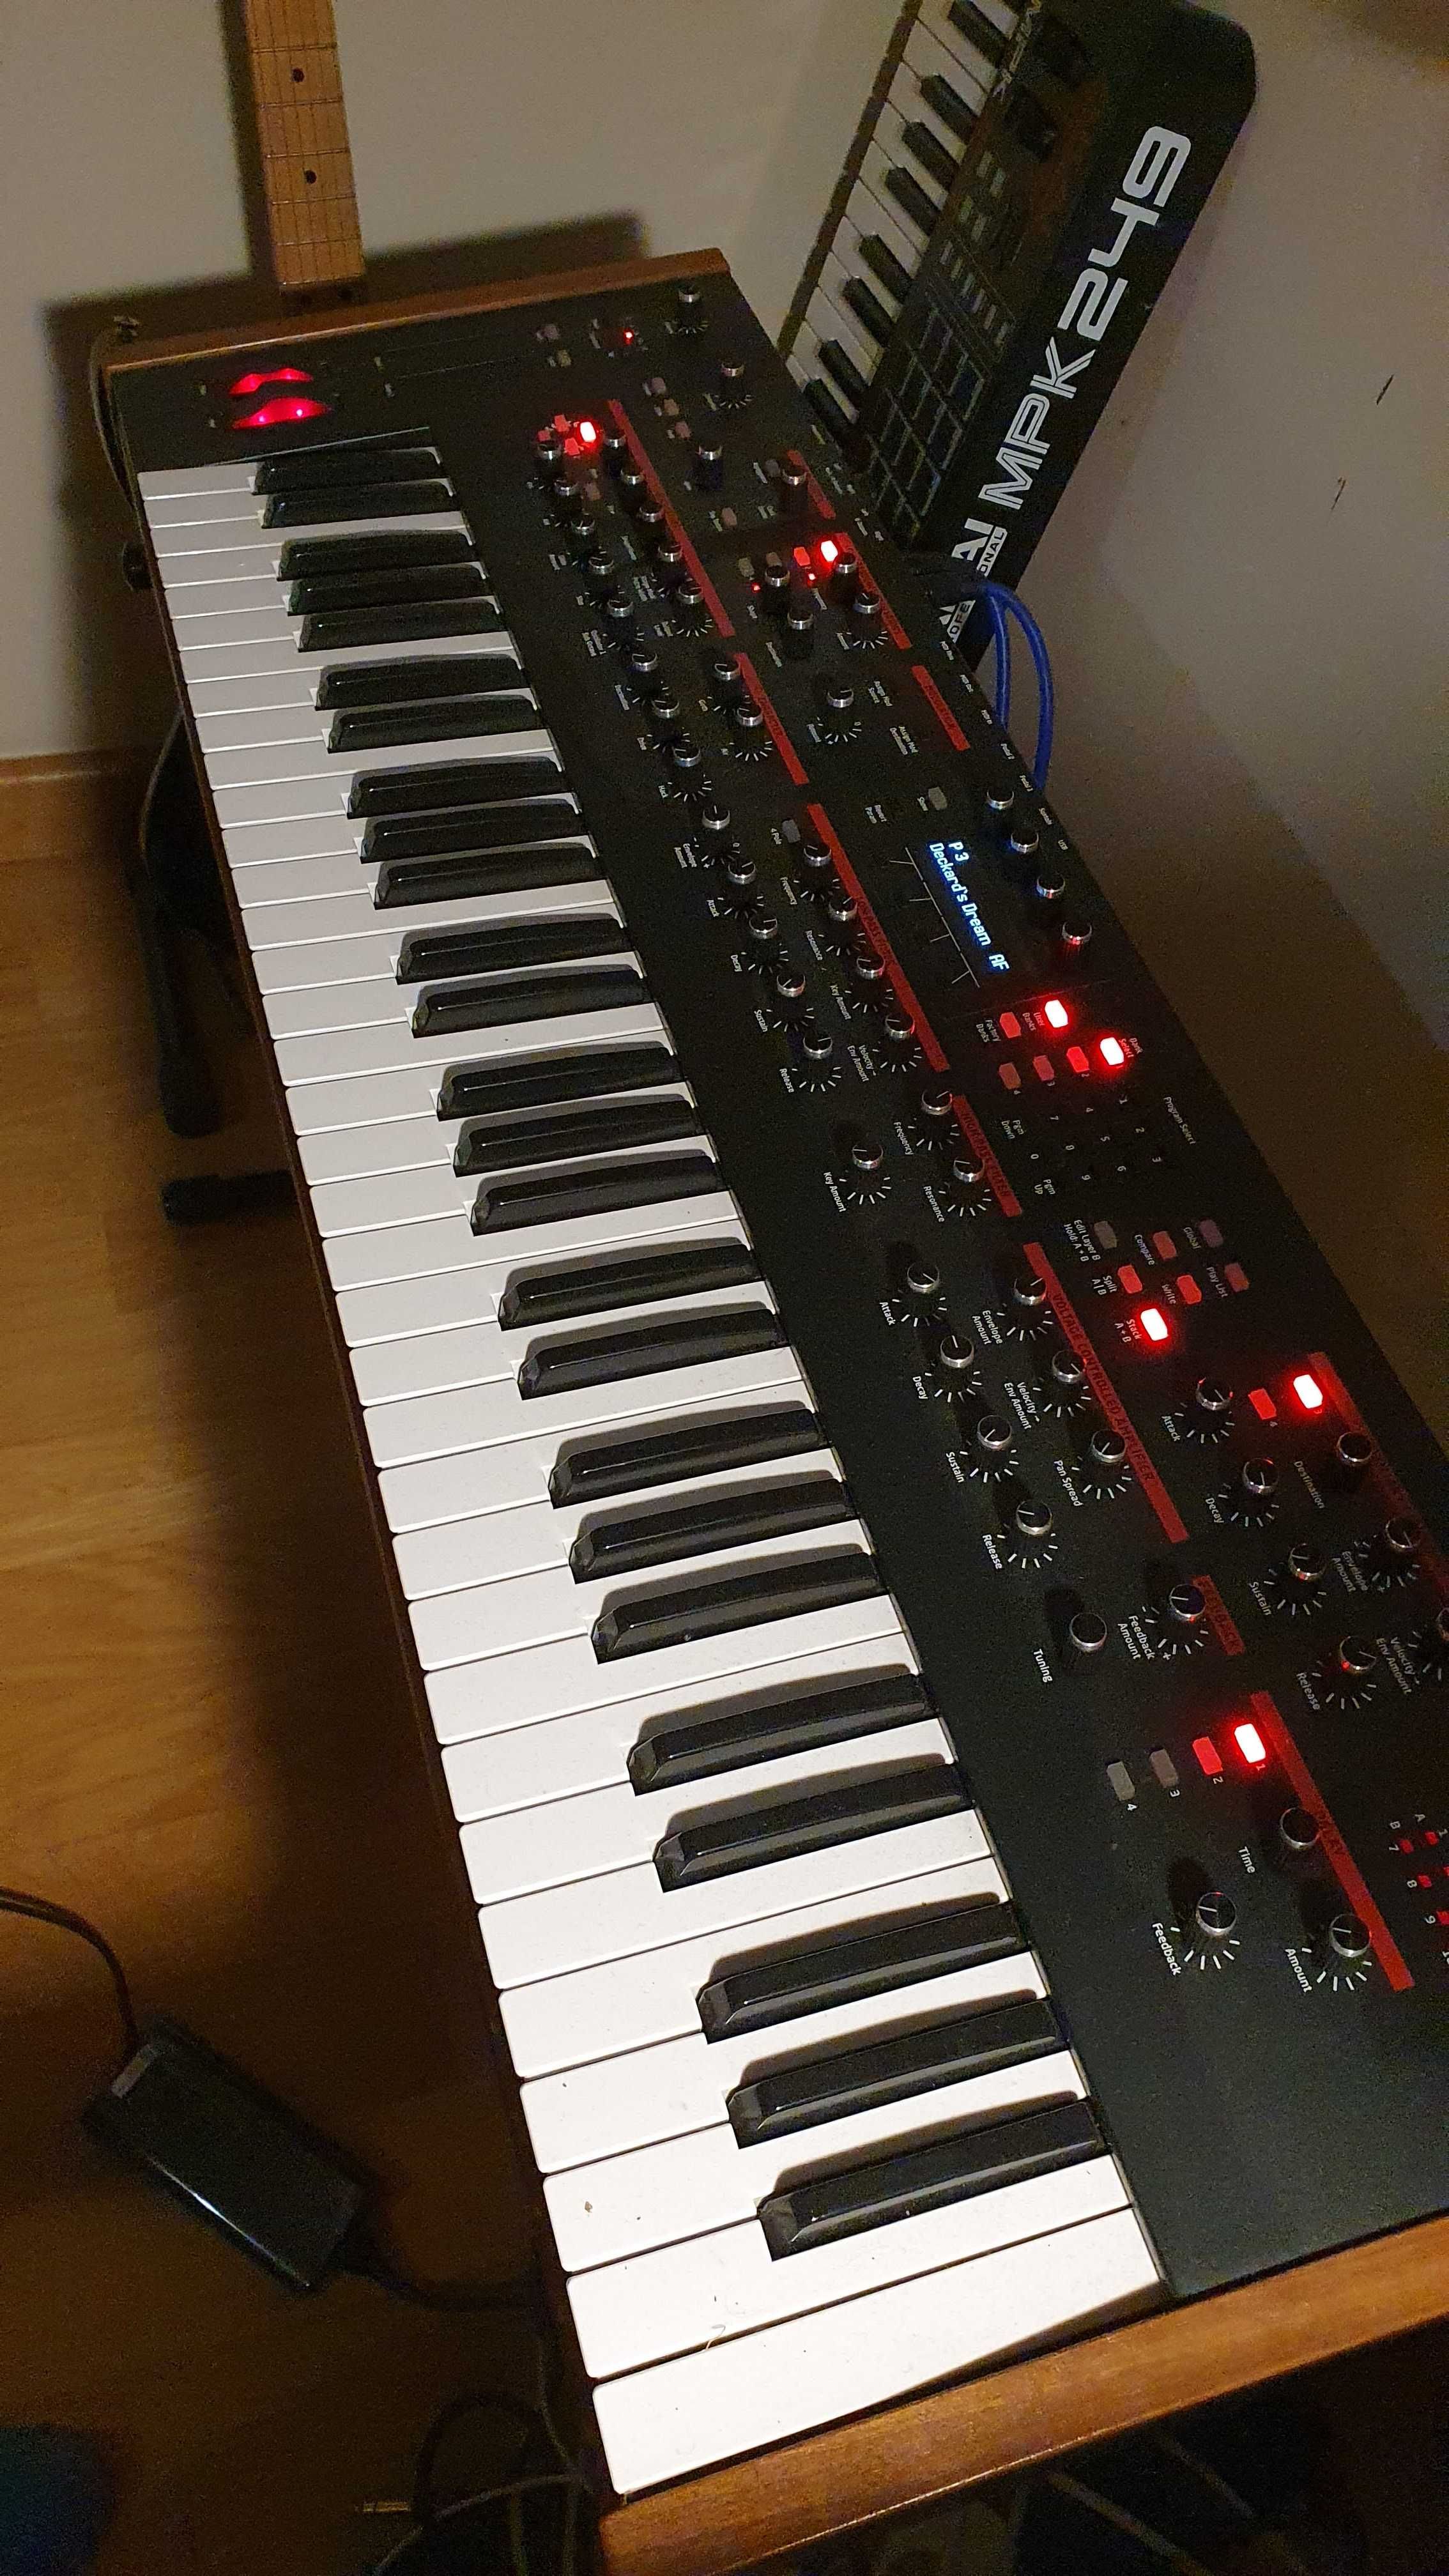 DSI Dave Smith Sequential Prophet 12